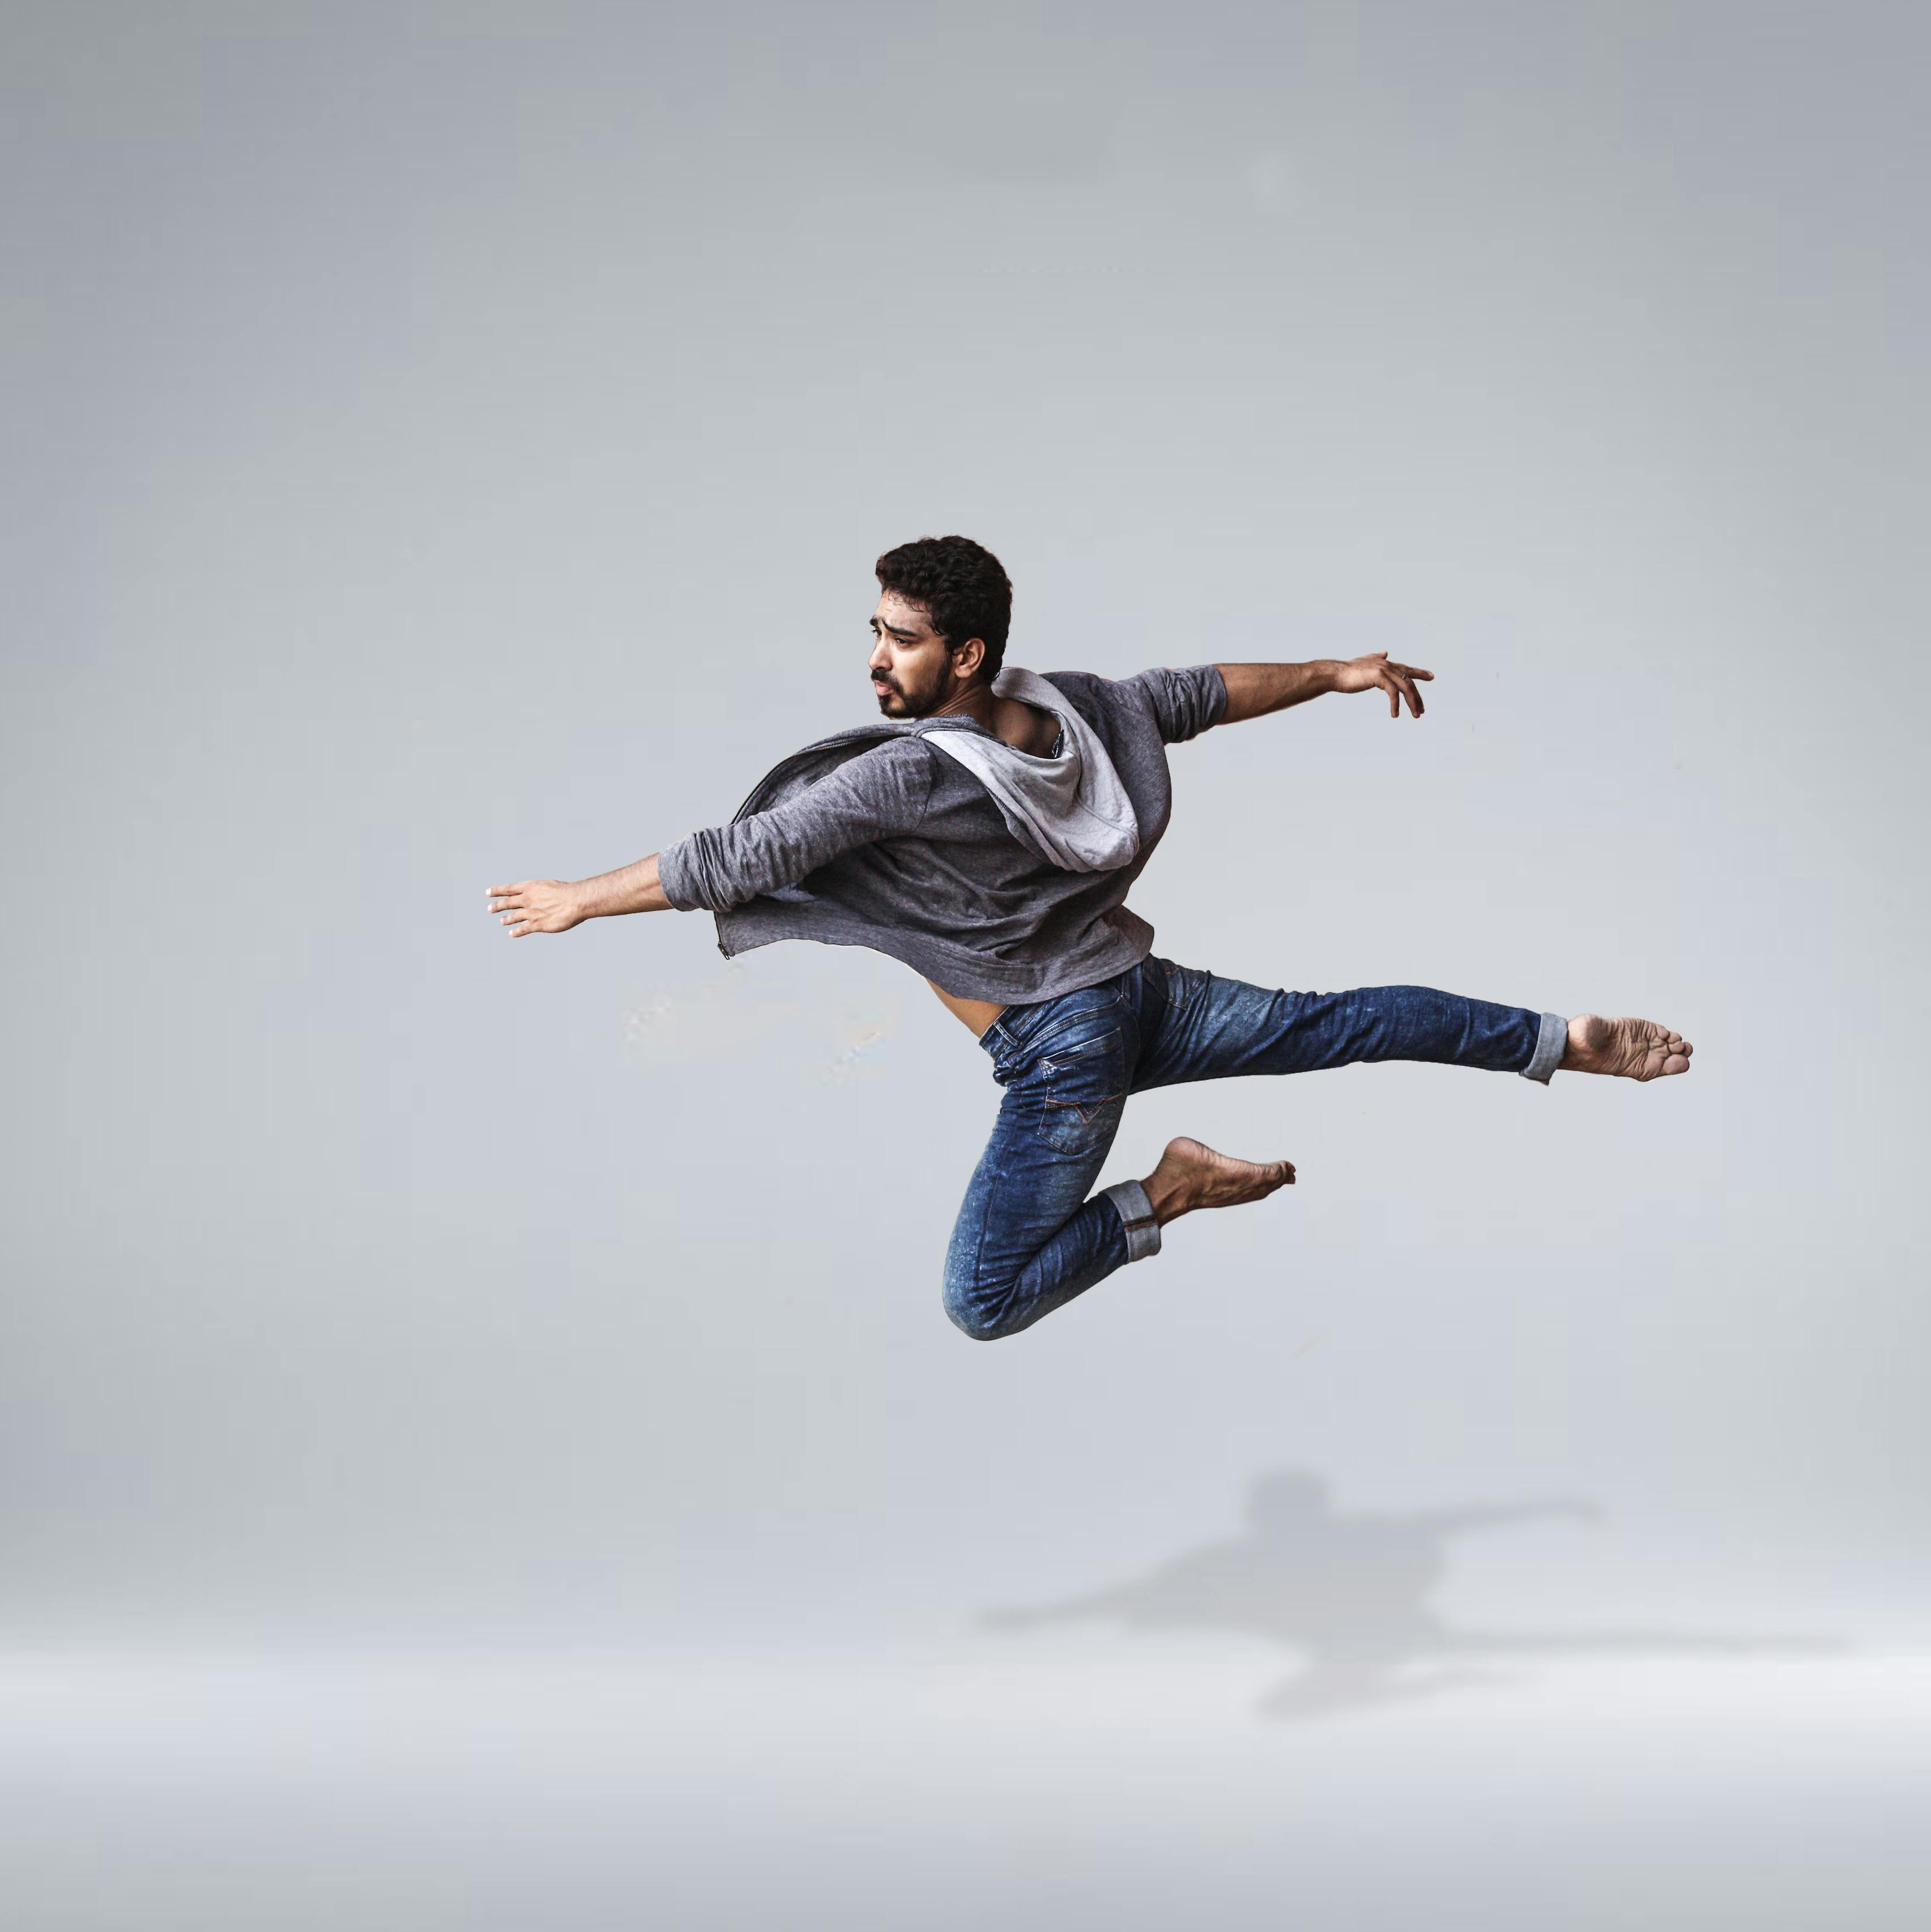 jumping poses photography